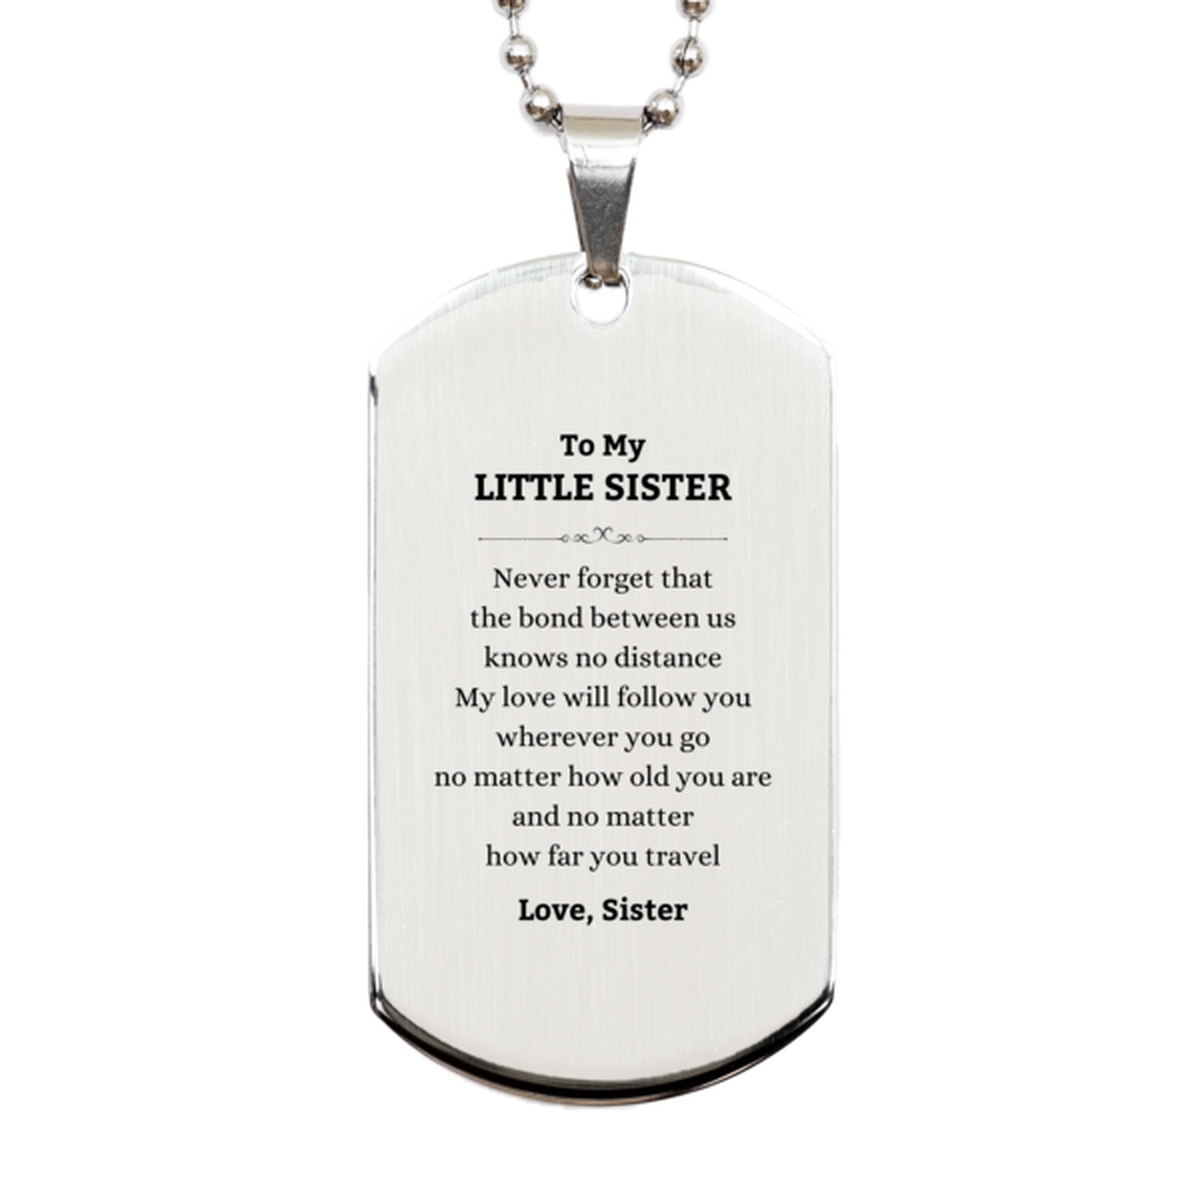 Little Sister Birthday Gifts from Sister, Adjustable Silver Dog Tag for Little Sister Christmas Graduation Unique Gifts Little Sister Never forget that the bond between us knows no distance. Love, Sister